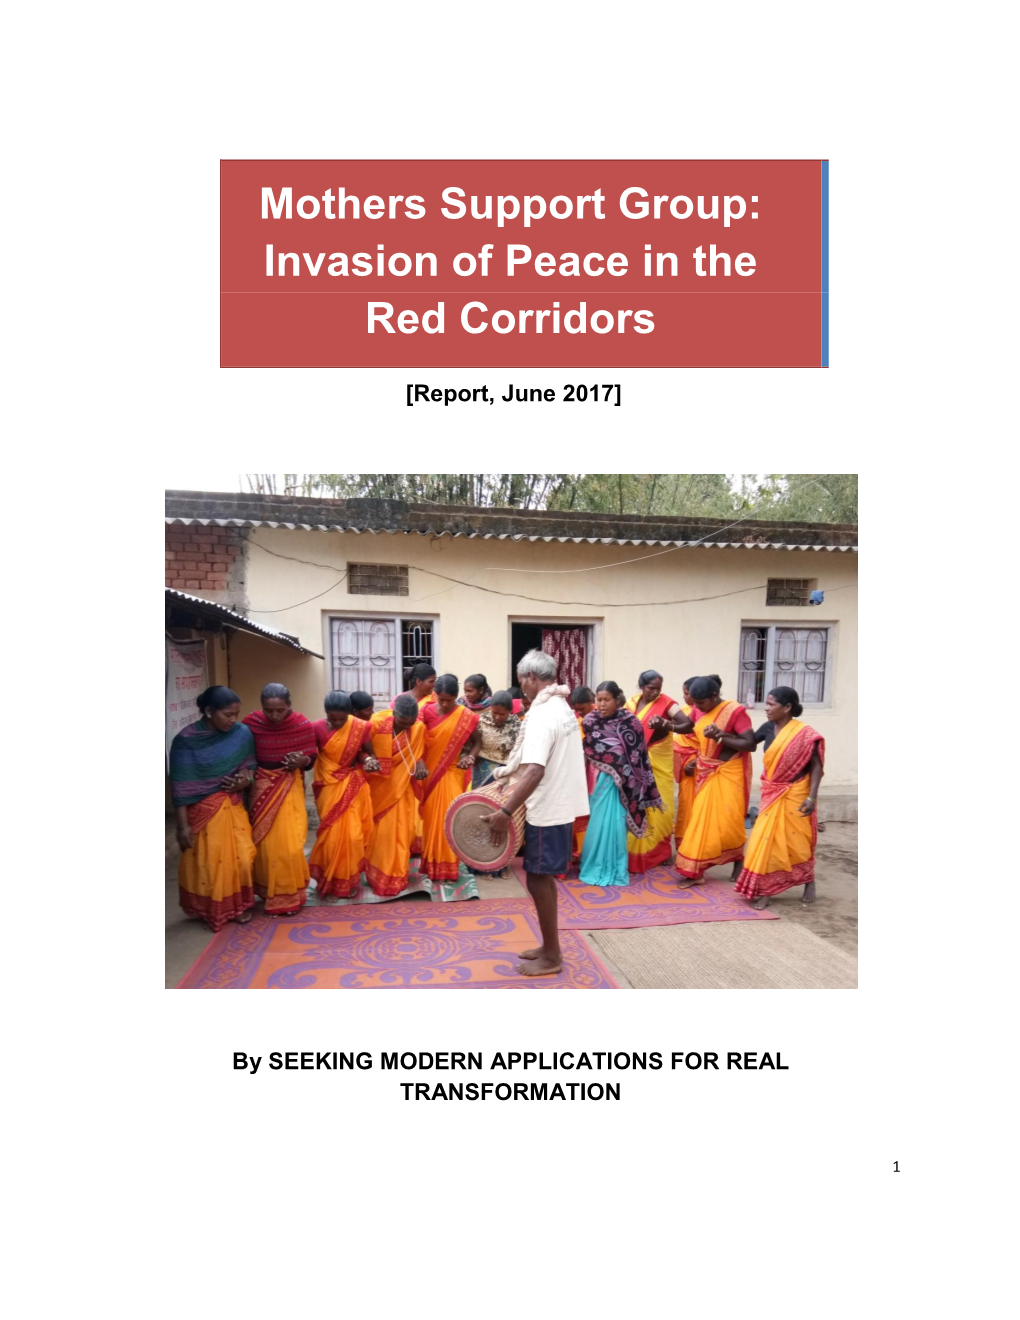 Mothers Support Group: Invasion of Peace in the Red Corridors